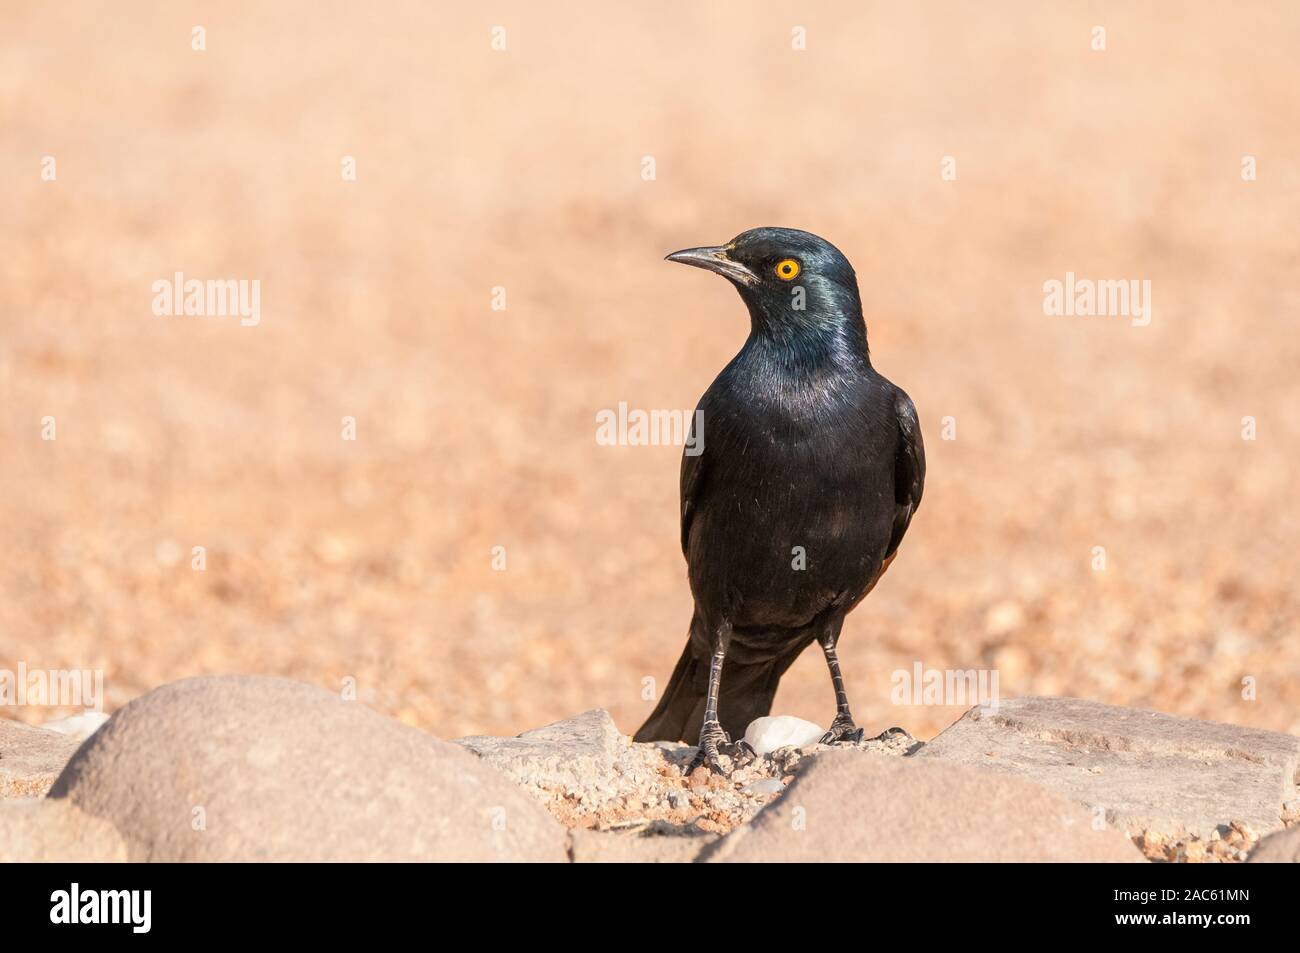 Pale-winged starling, Onychognathus nabouroup, Namibia Foto Stock